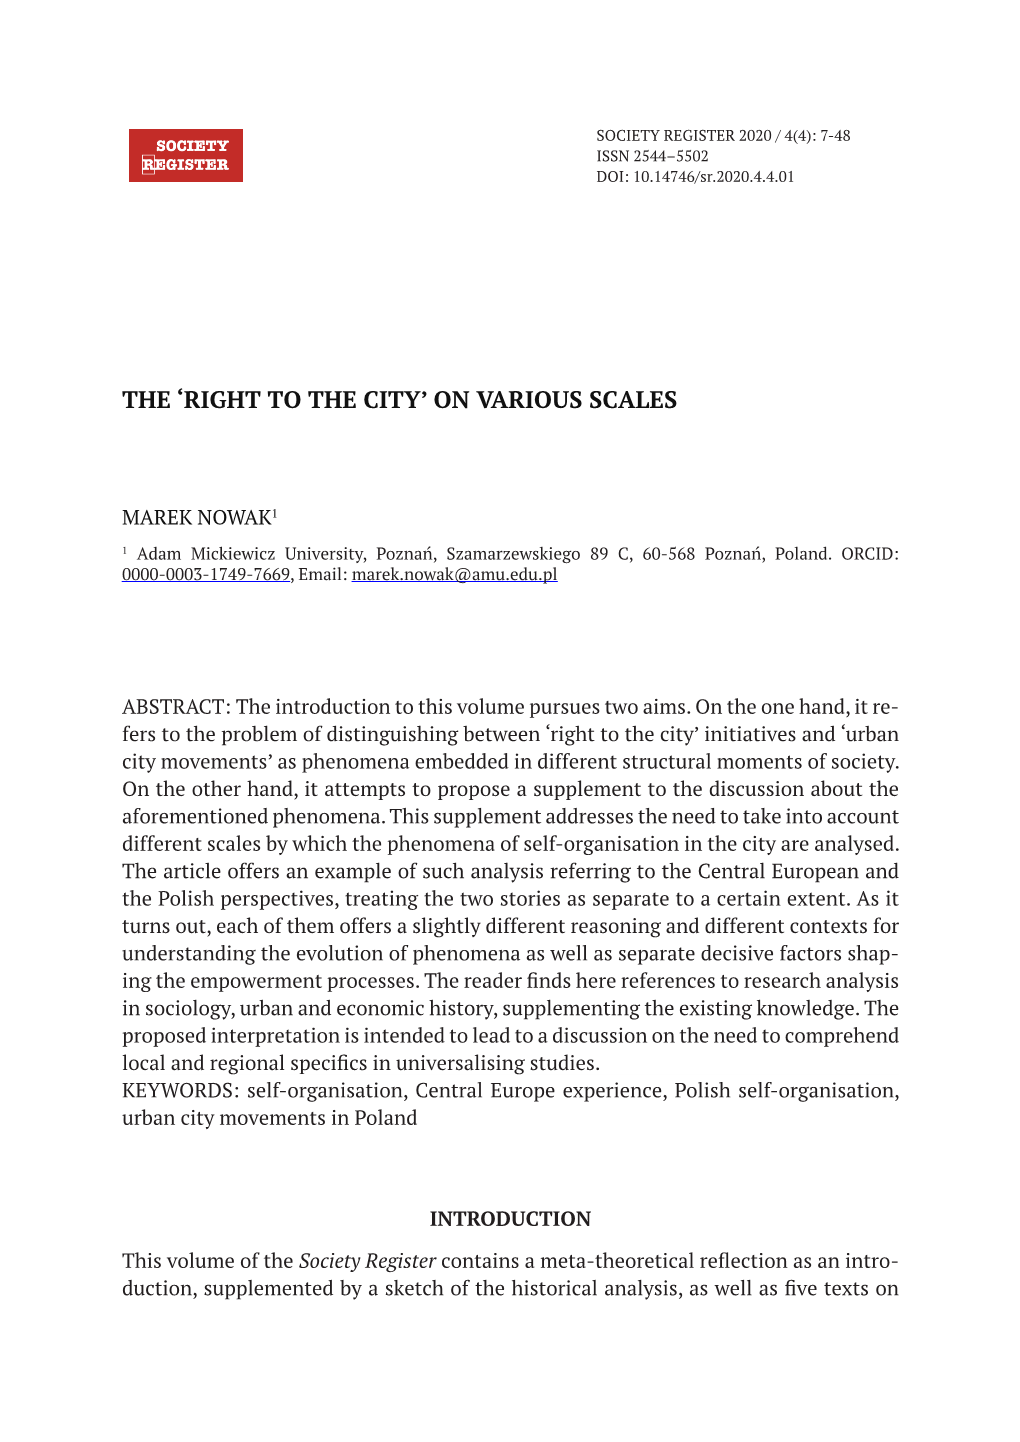 Right to the City’ on Various Scales